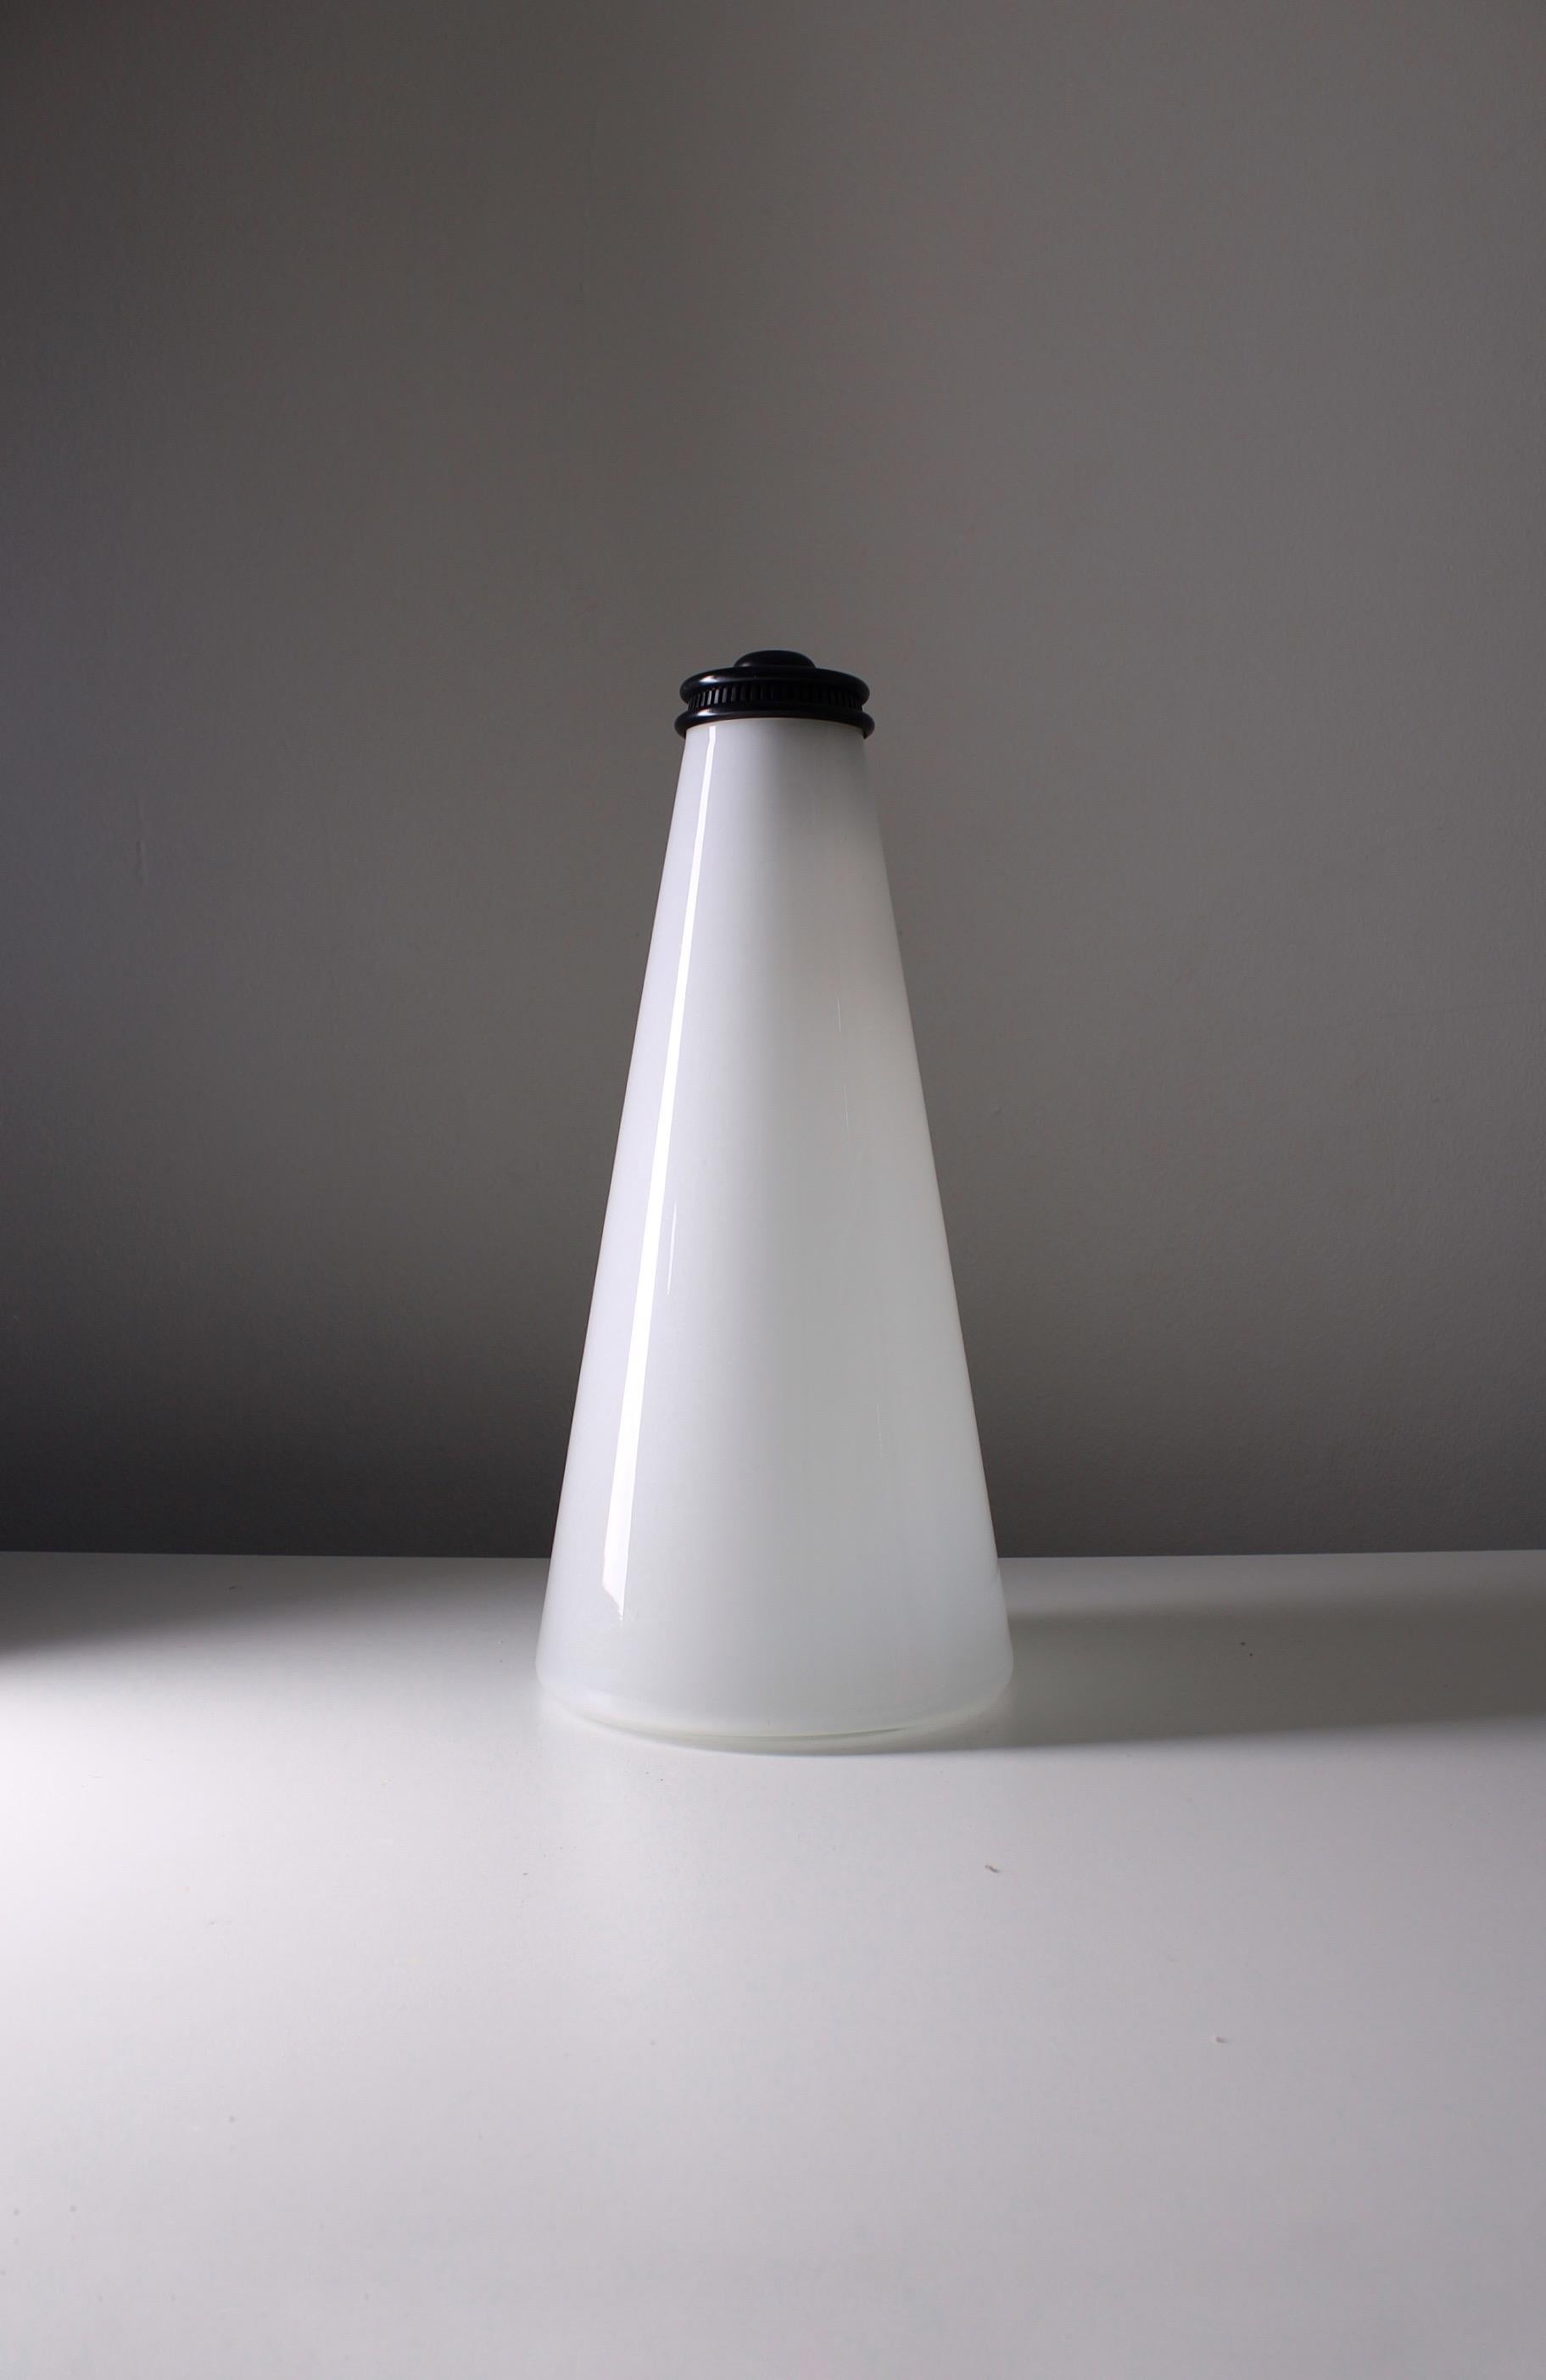 
Table lamp, model Cono designed by Ezio Didone for Arteluce in 1979. The lamp is made of opaque milky-white Murano glass with a subtle gradient. On the top of the lamp is a round black cap that holds the armature and a switch. The lamp was produced